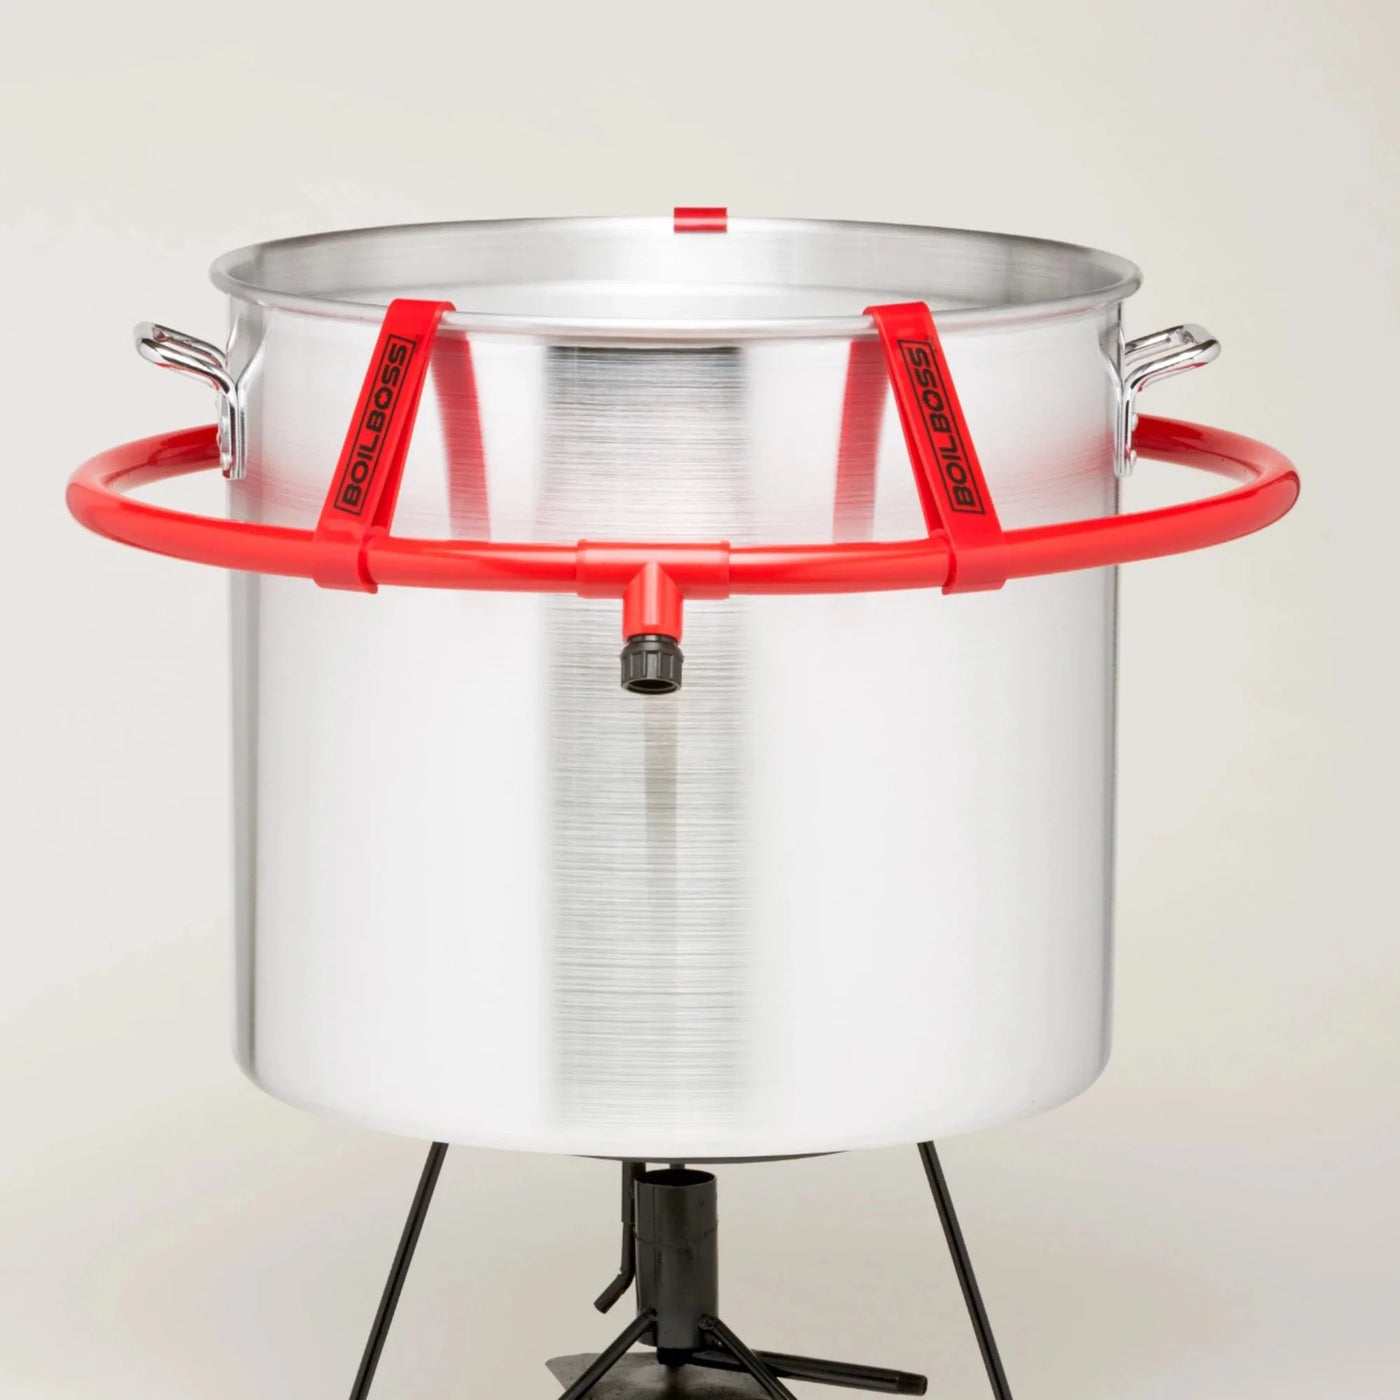 The Boil Boss Ring Cooling System